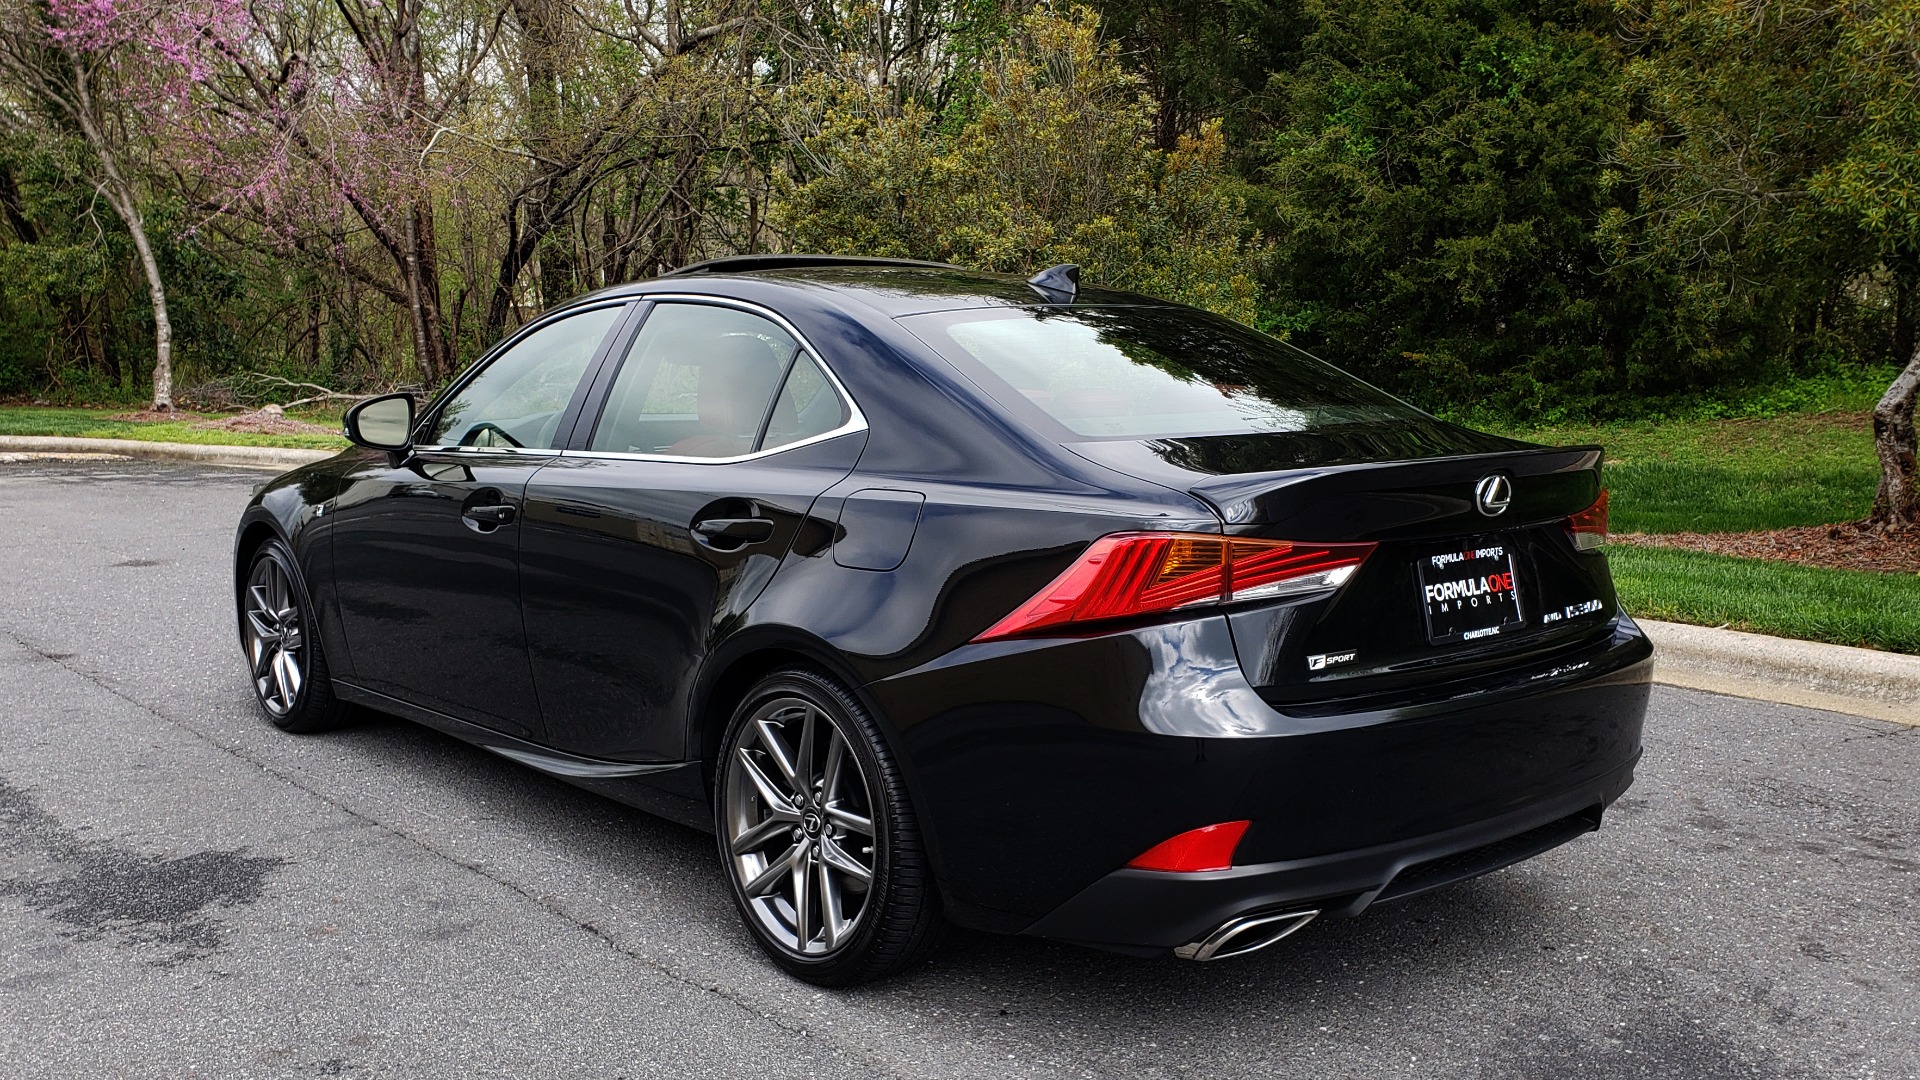 Used 2017 Lexus IS 300 F SPORT AWD / NAV / SUNROOF / REARVIEW / VENT SEATS / BSM for sale Sold at Formula Imports in Charlotte NC 28227 3